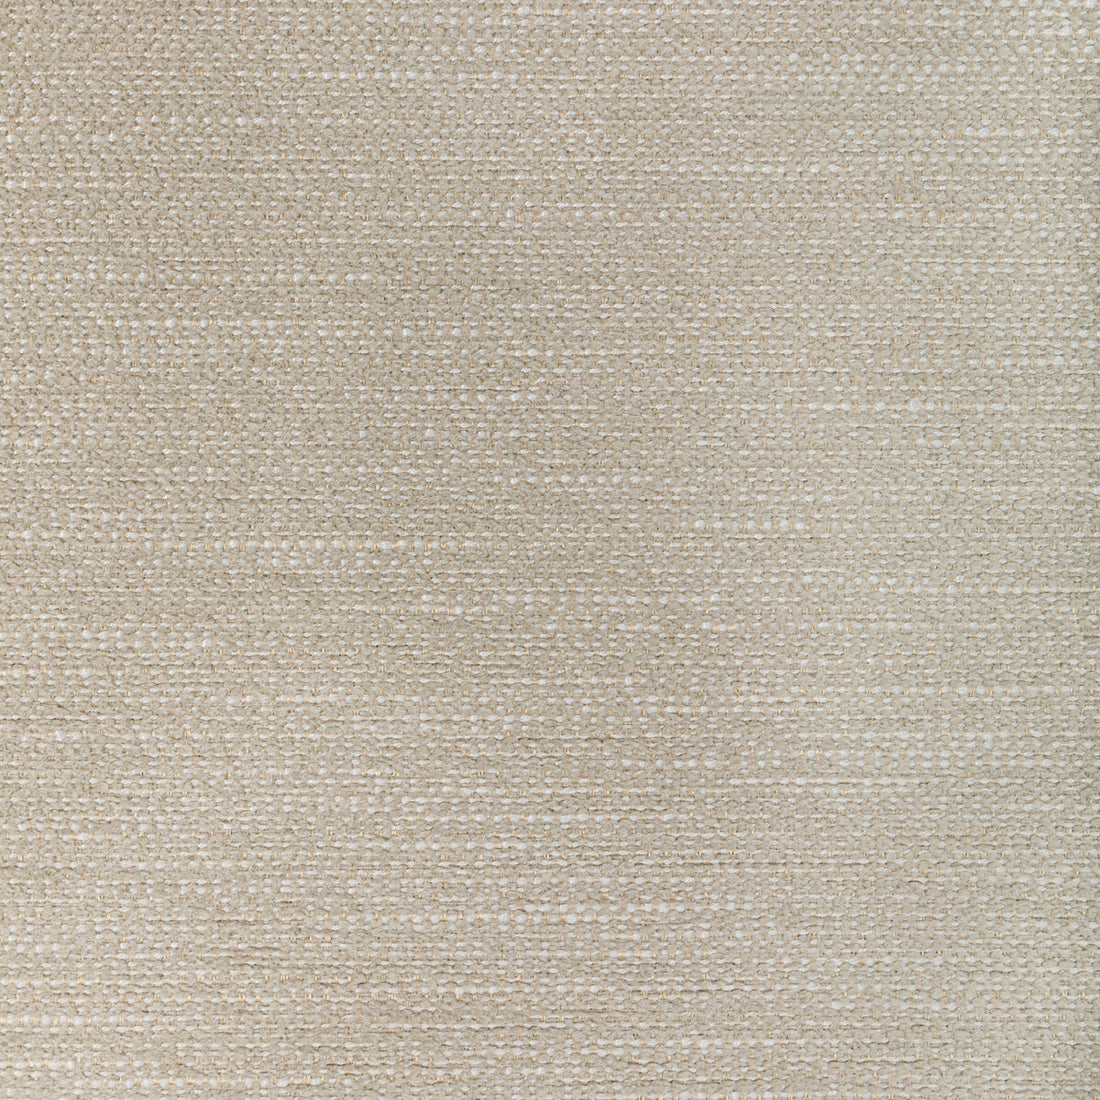 Recoup fabric in sand dollar color - pattern 36569.106.0 - by Kravet Contract in the Seaqual collection